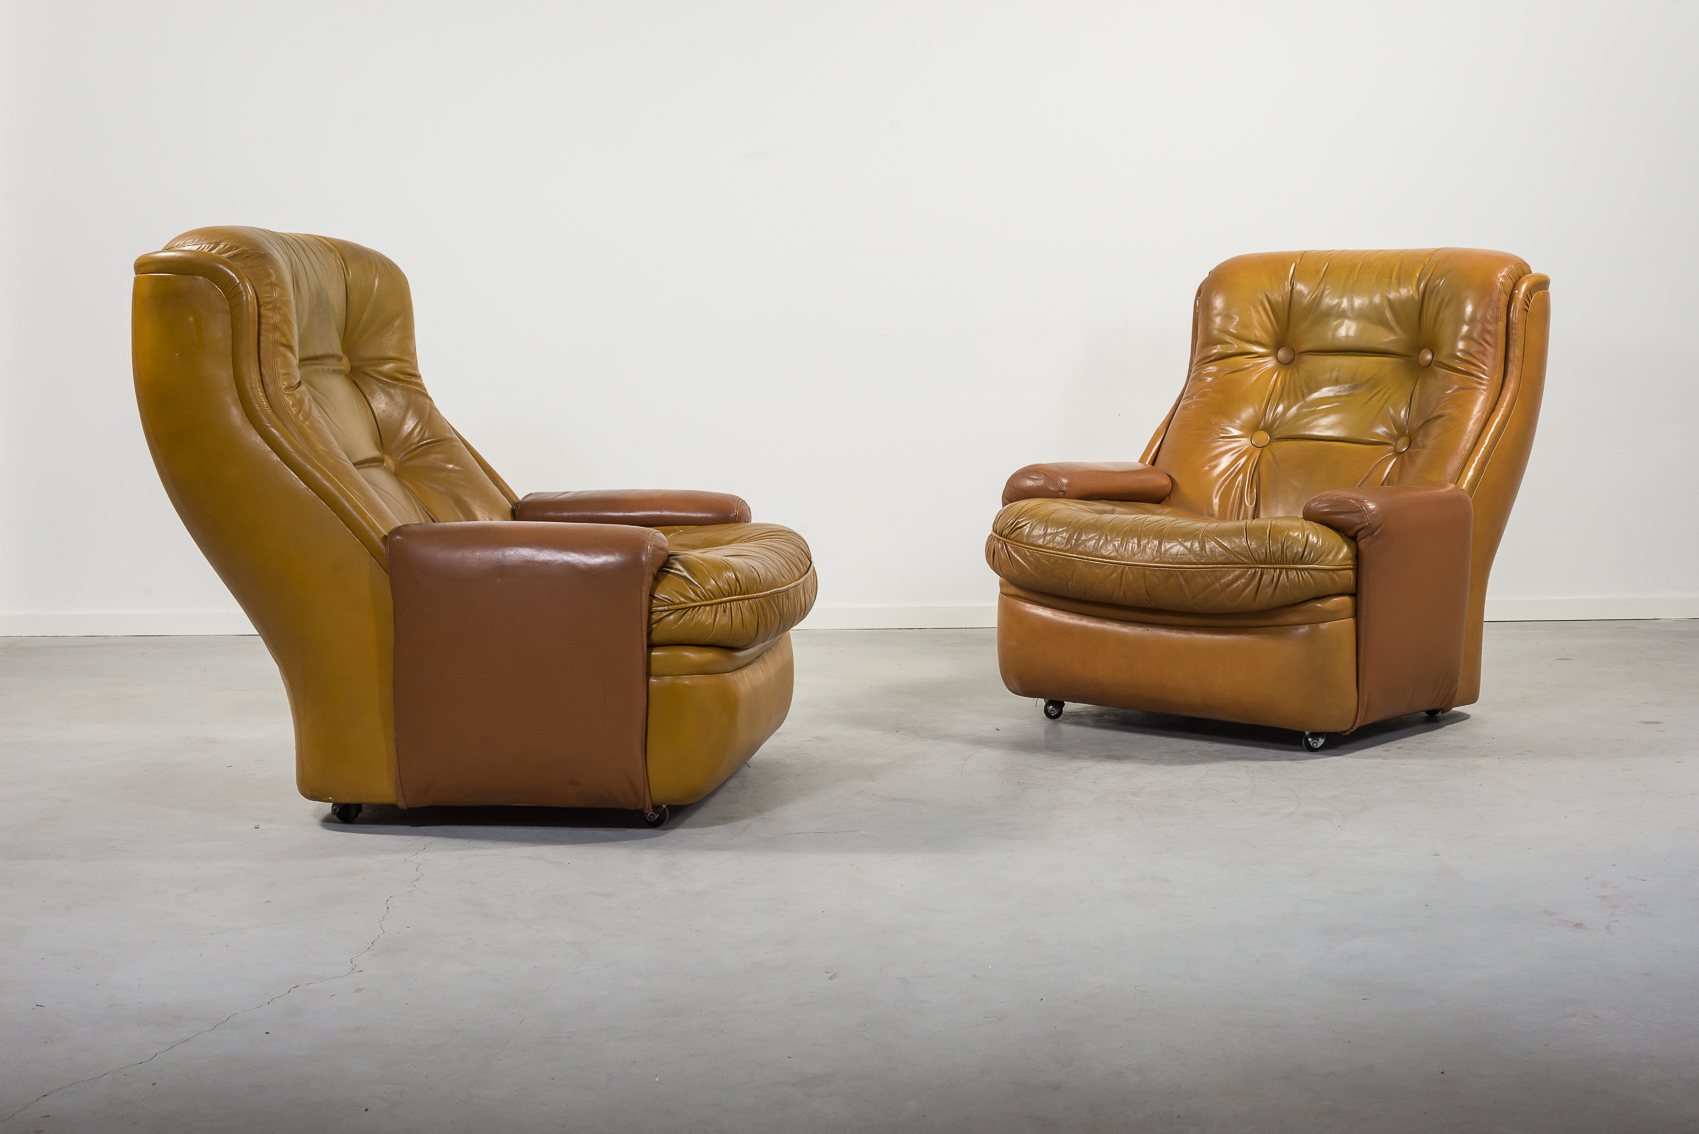 Richly Upholstered Overstuffed Seating, Overstuffed Leather Chairs